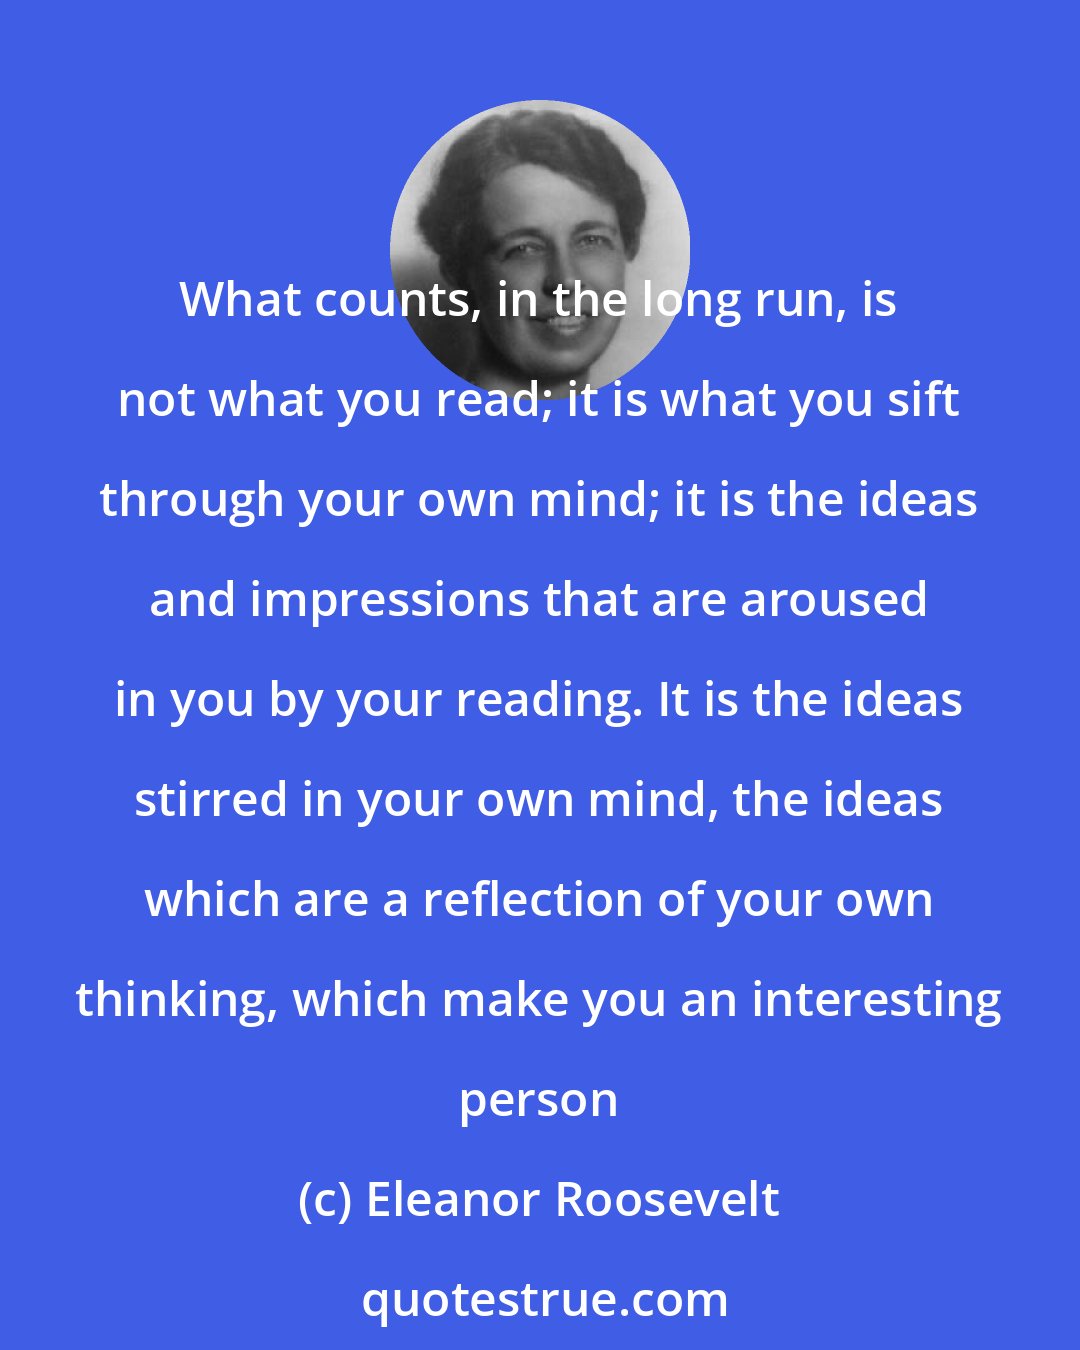 Eleanor Roosevelt: What counts, in the long run, is not what you read; it is what you sift through your own mind; it is the ideas and impressions that are aroused in you by your reading. It is the ideas stirred in your own mind, the ideas which are a reflection of your own thinking, which make you an interesting person